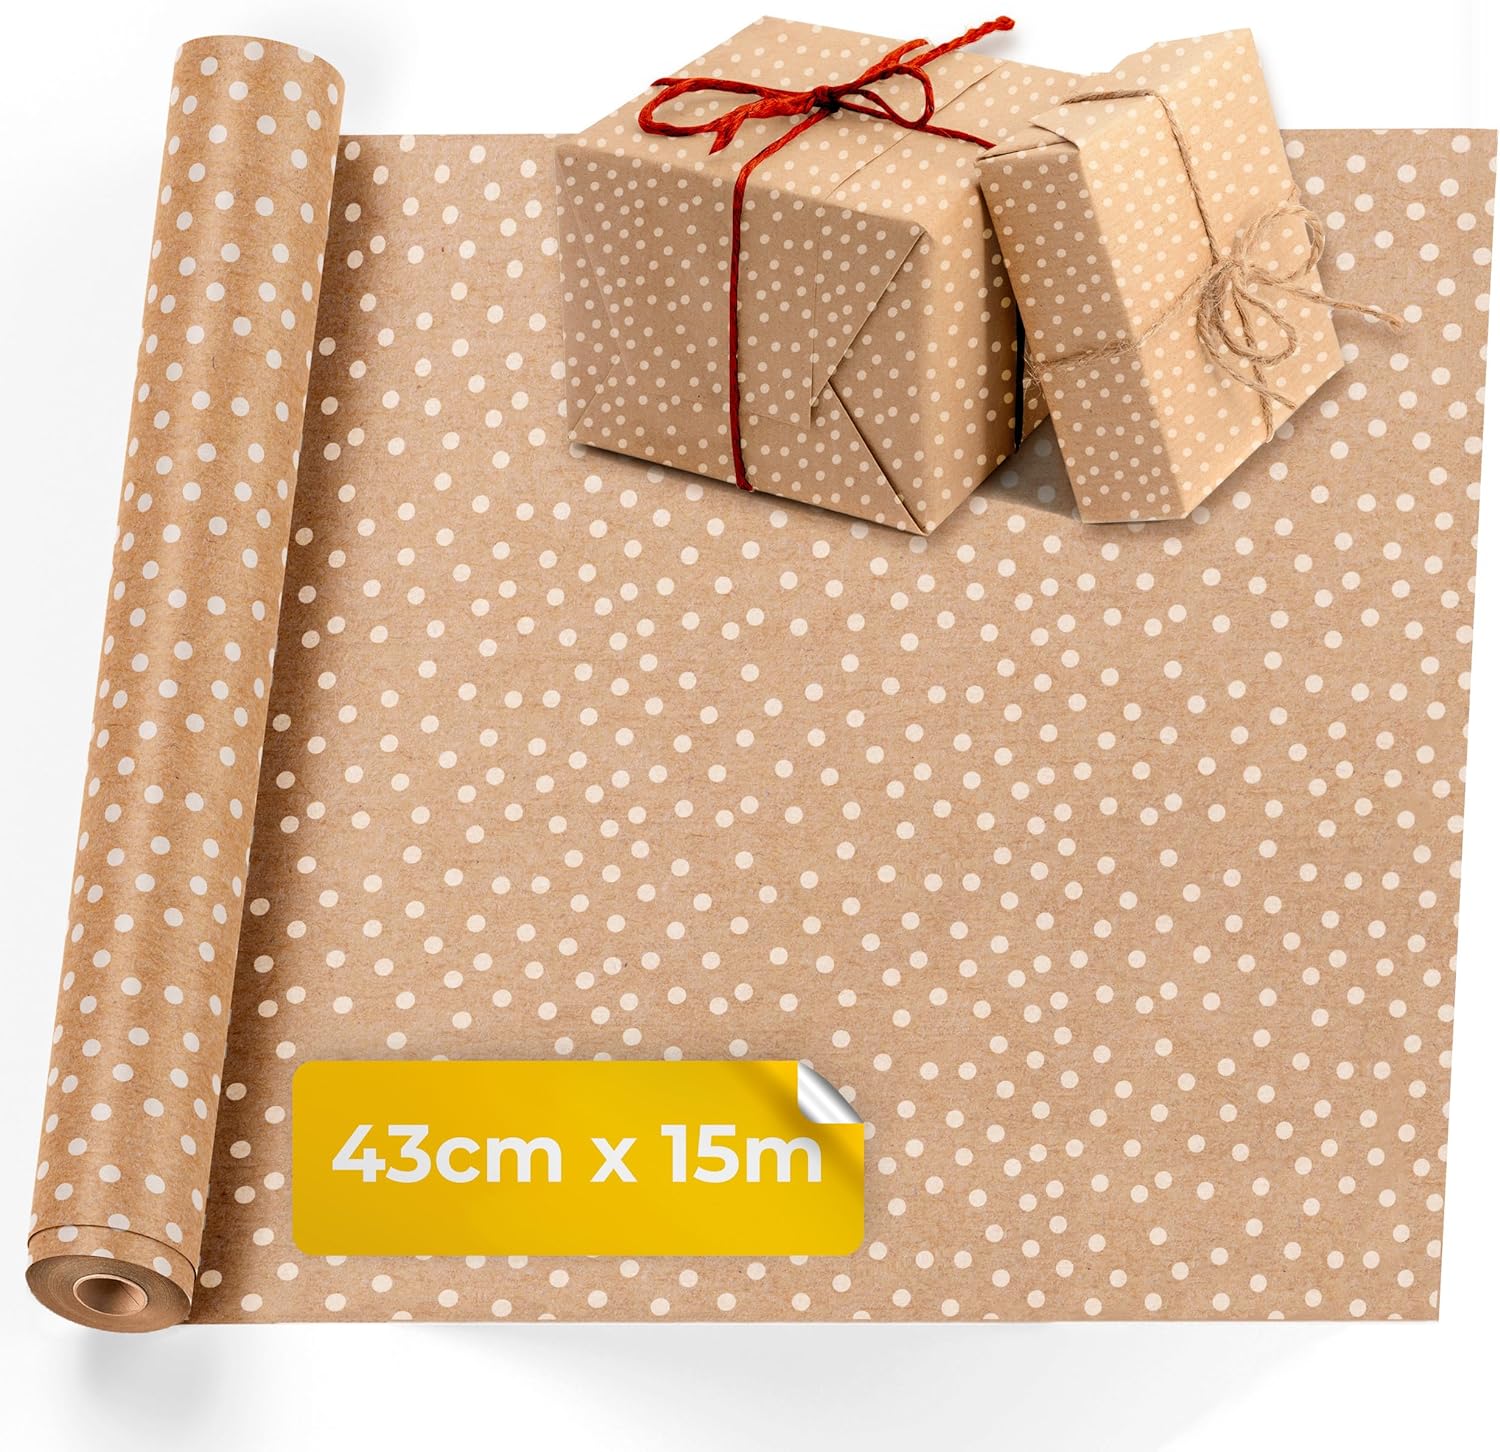 Kraft Wrapping Paper - Premium Gift Wrapping Paper with Strings - Brown Wrapping Paper, Multipurpose Brown Paper Roll, Wrapping Paper Brown for Parcel Packing or Arts & Crafts